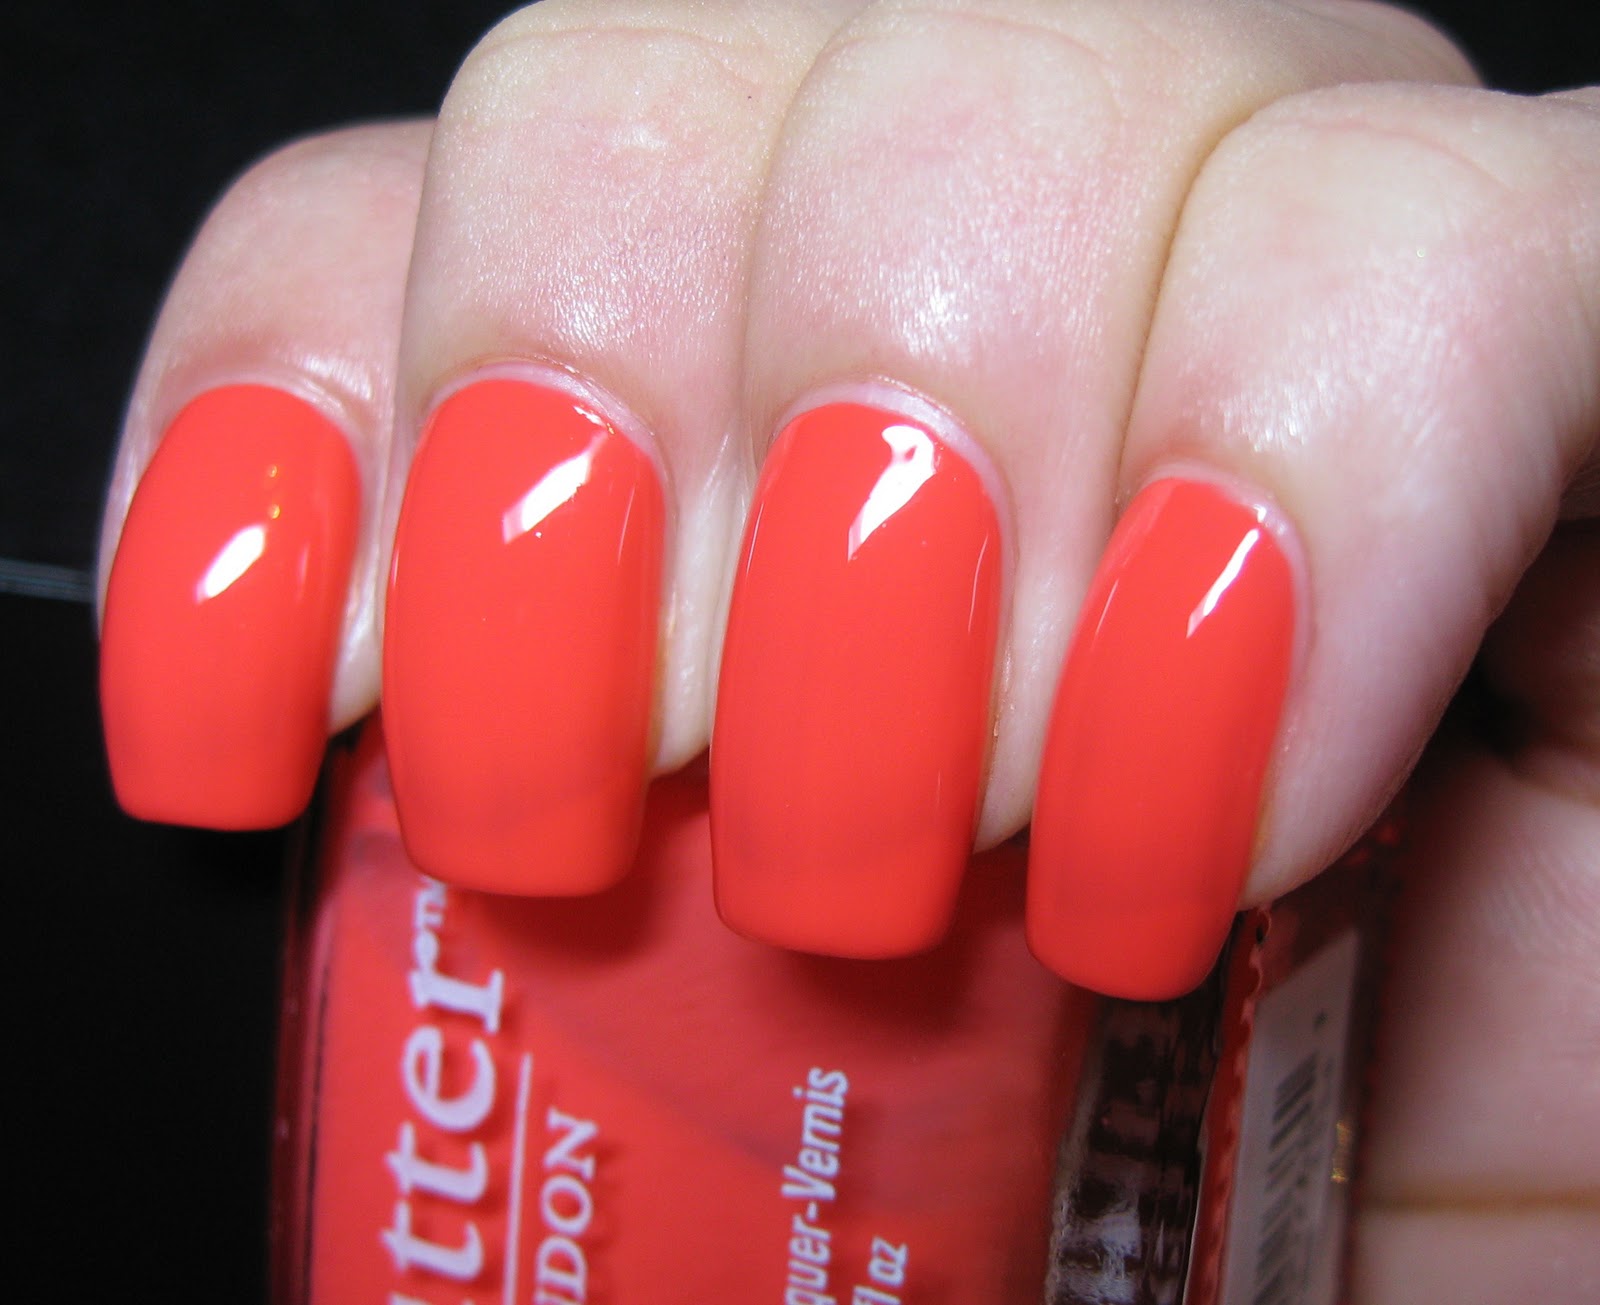 7. Butter London Nail Lacquer in "Jaffa" - wide 6